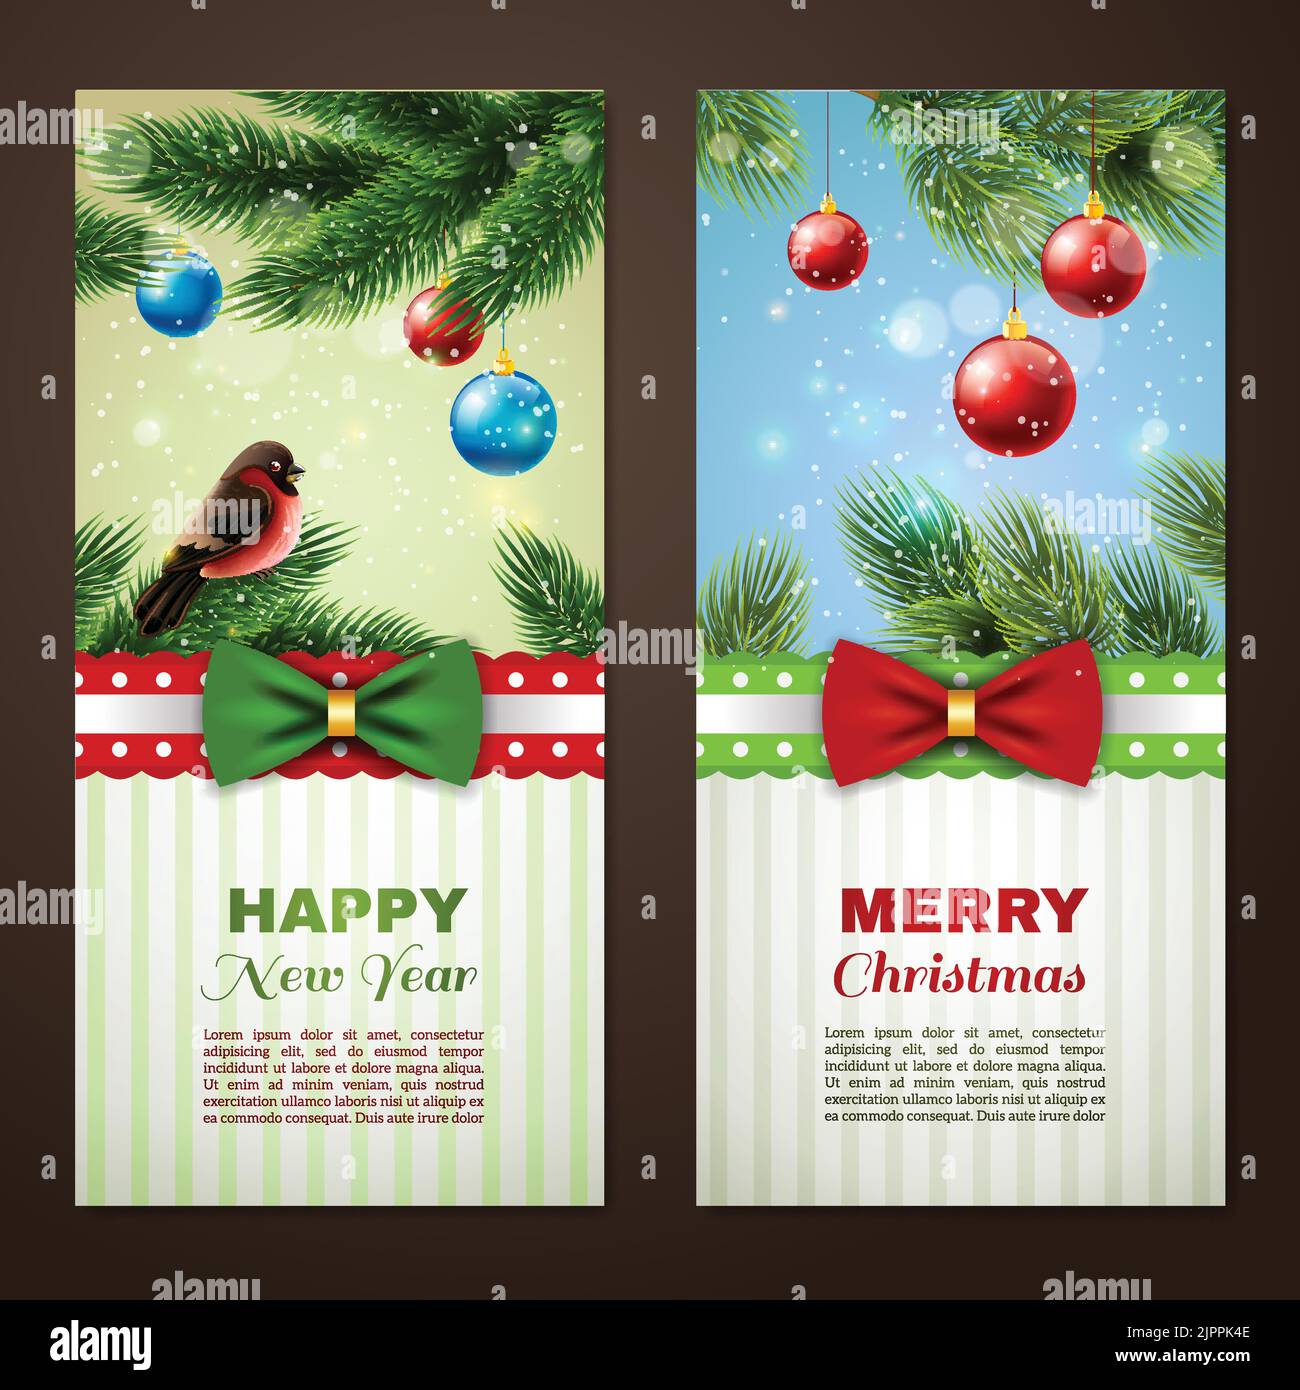 Christmas and new year season classic greetings cards samples 2 vertical banners set abstract isolated vector illustrationt Stock Vector